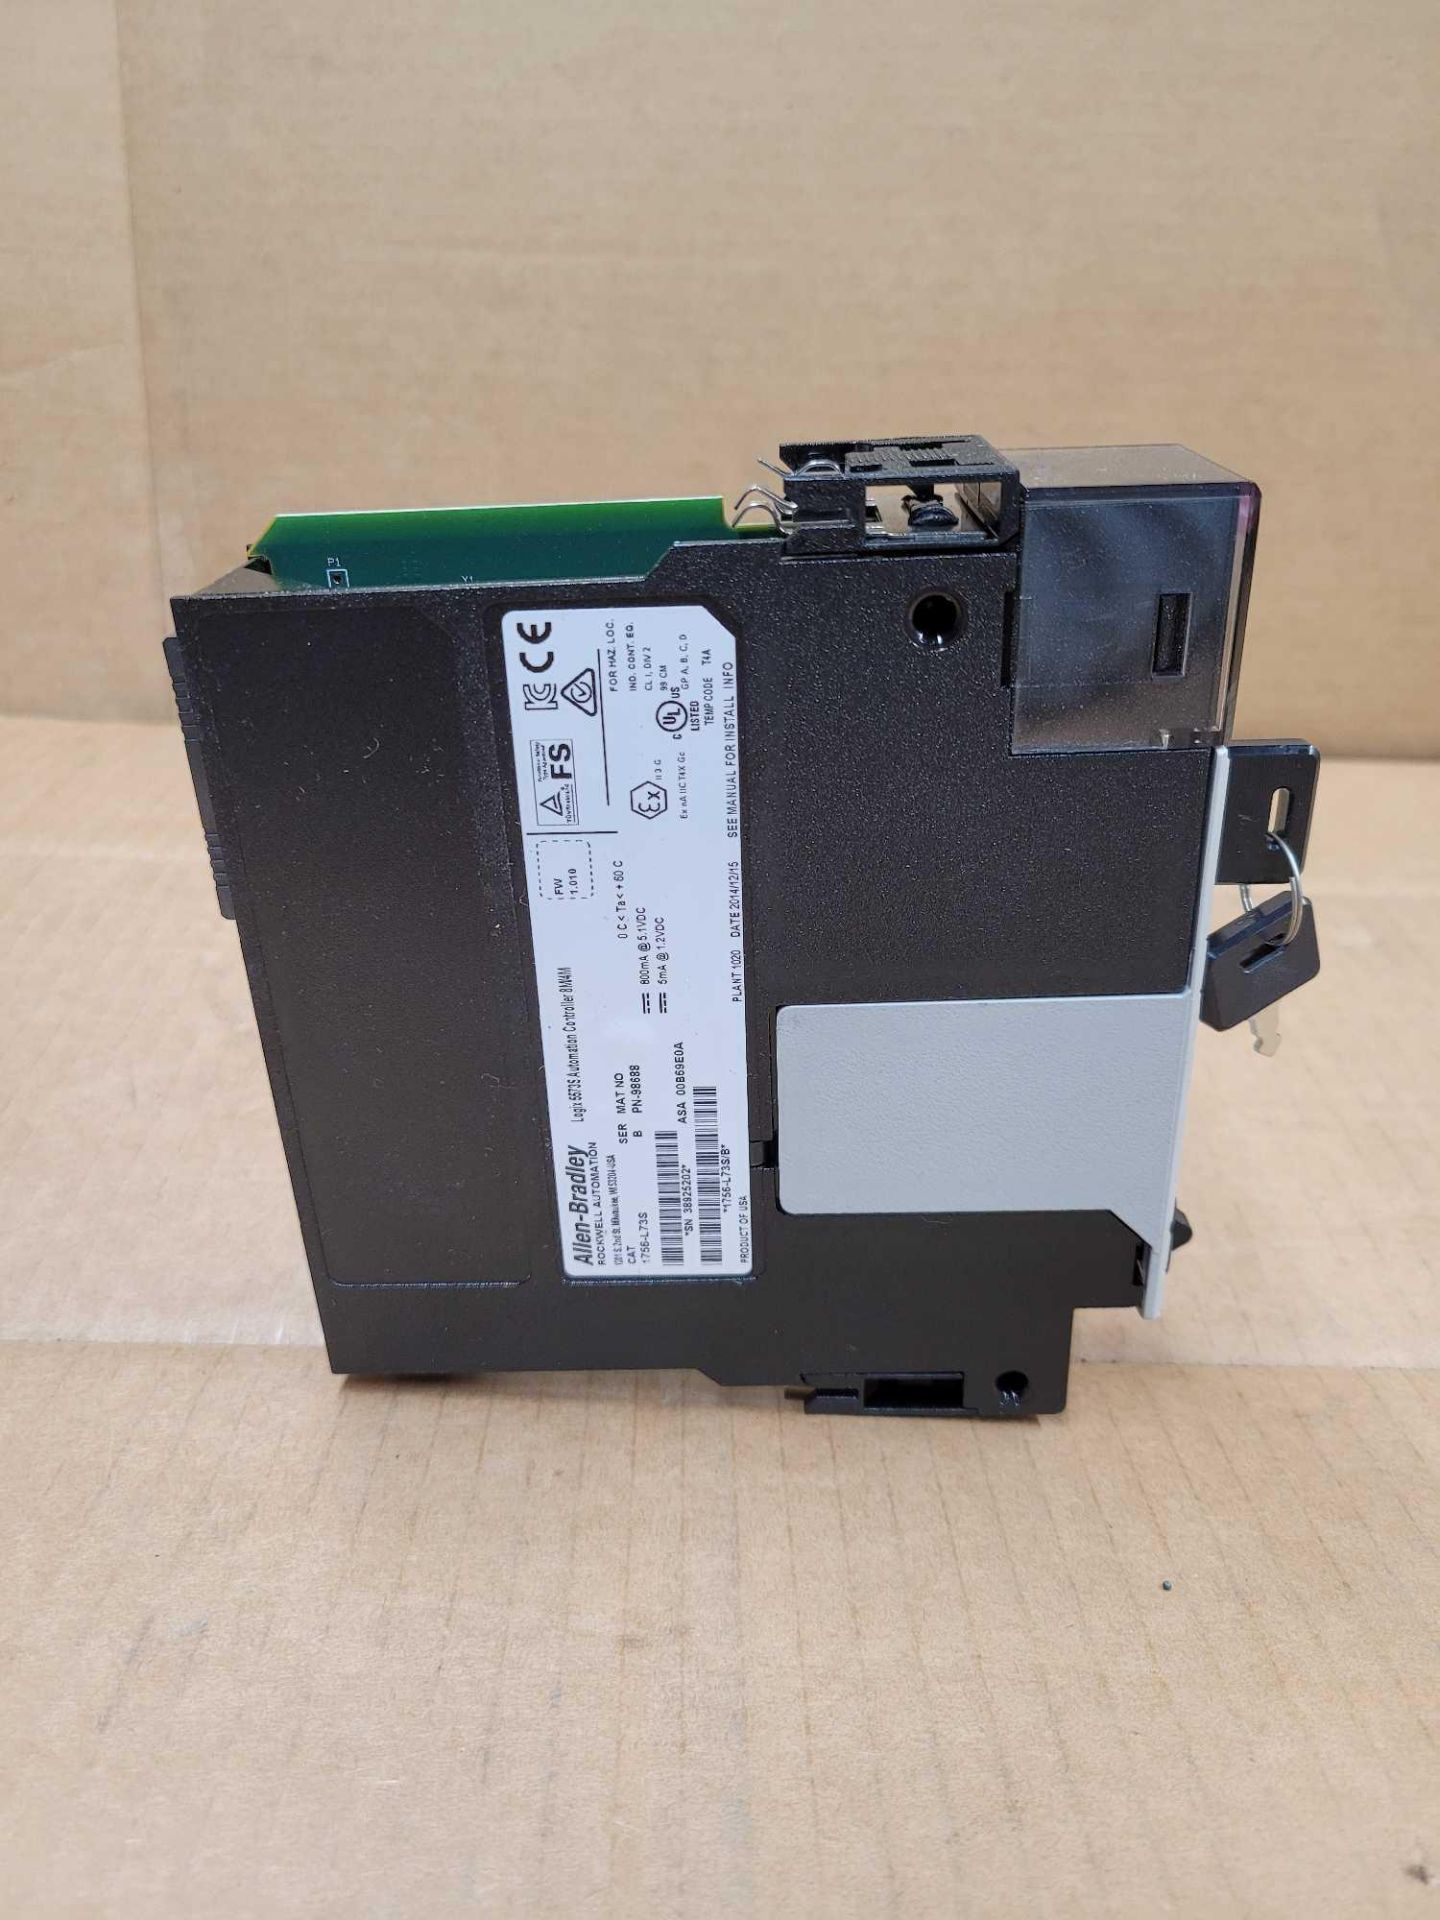 ALLEN BRADLEY 1756-L73S  /  Series B Logix 5573S Automation Controller 8M/4M  /  Lot Weight: 0.6 lbs - Image 2 of 6